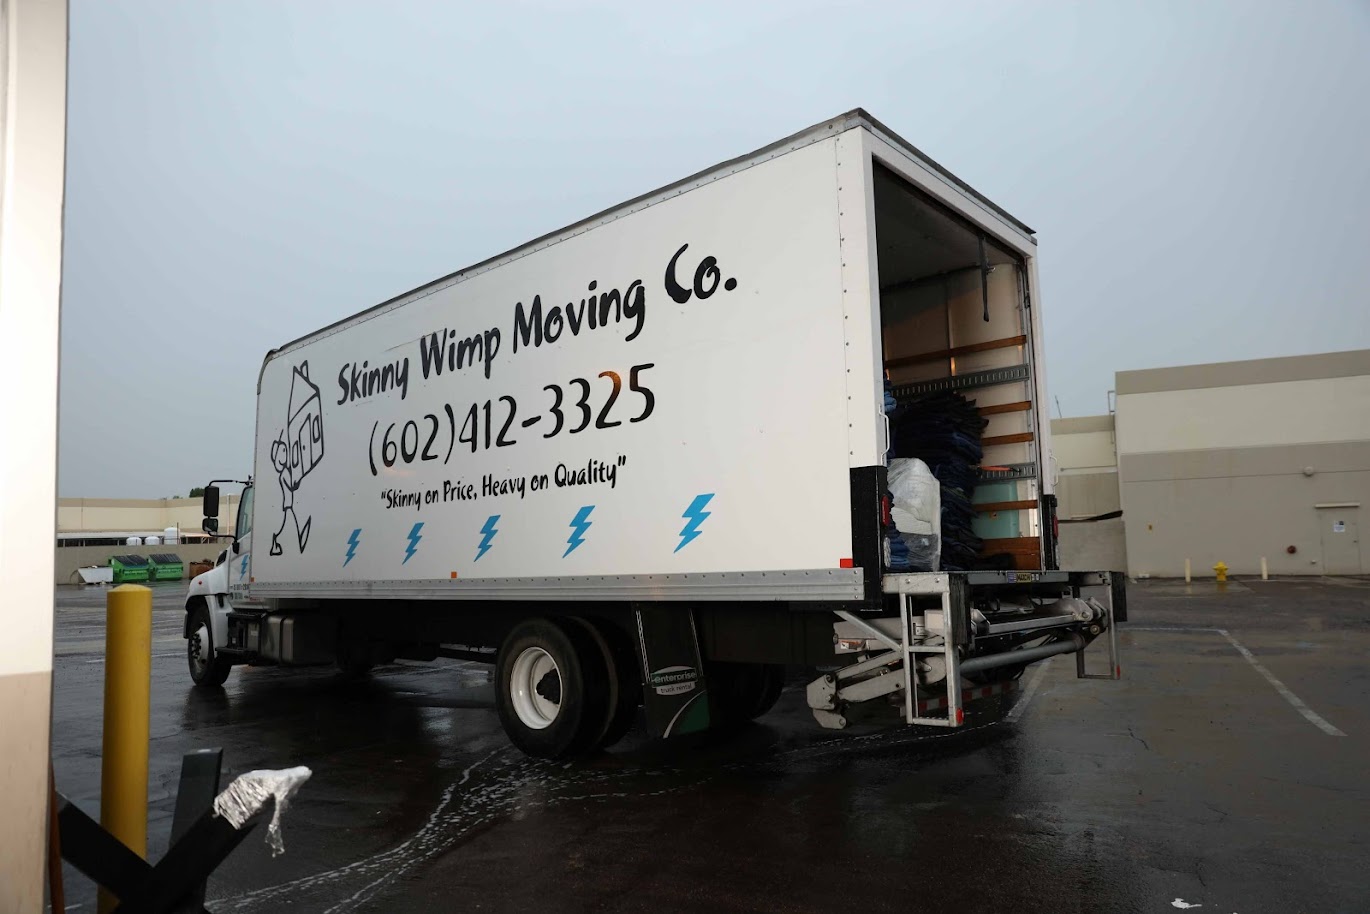 Skinny Wimp Moving and Storage